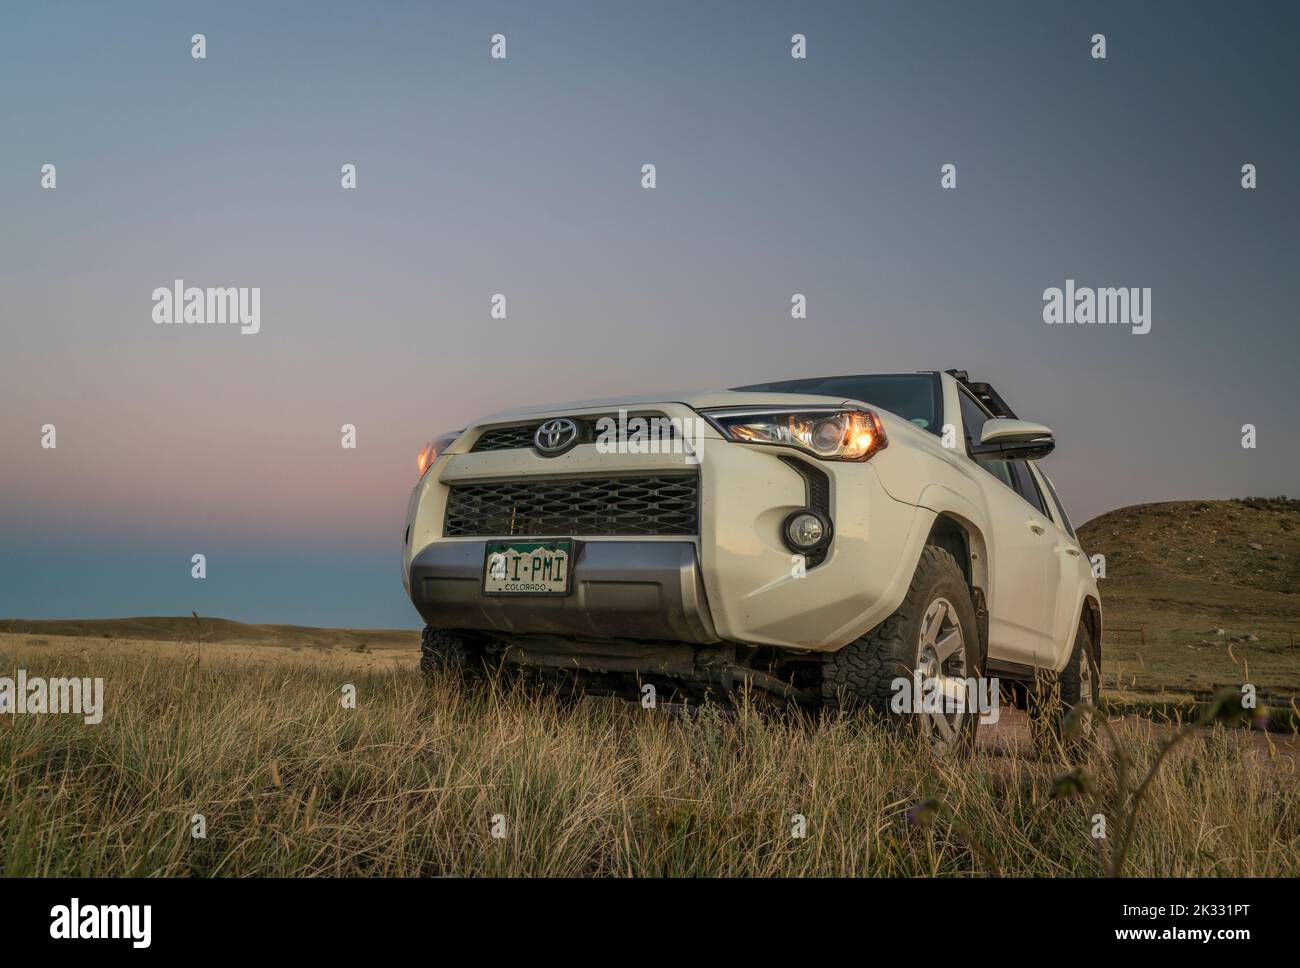 Fort Collins, CO, USA - September 18, 2022: Toyota 4Runner SUV at dusk parked at a trailhead in Soapstone Prairie Natural Area in Colorado foothills. Stock Photo